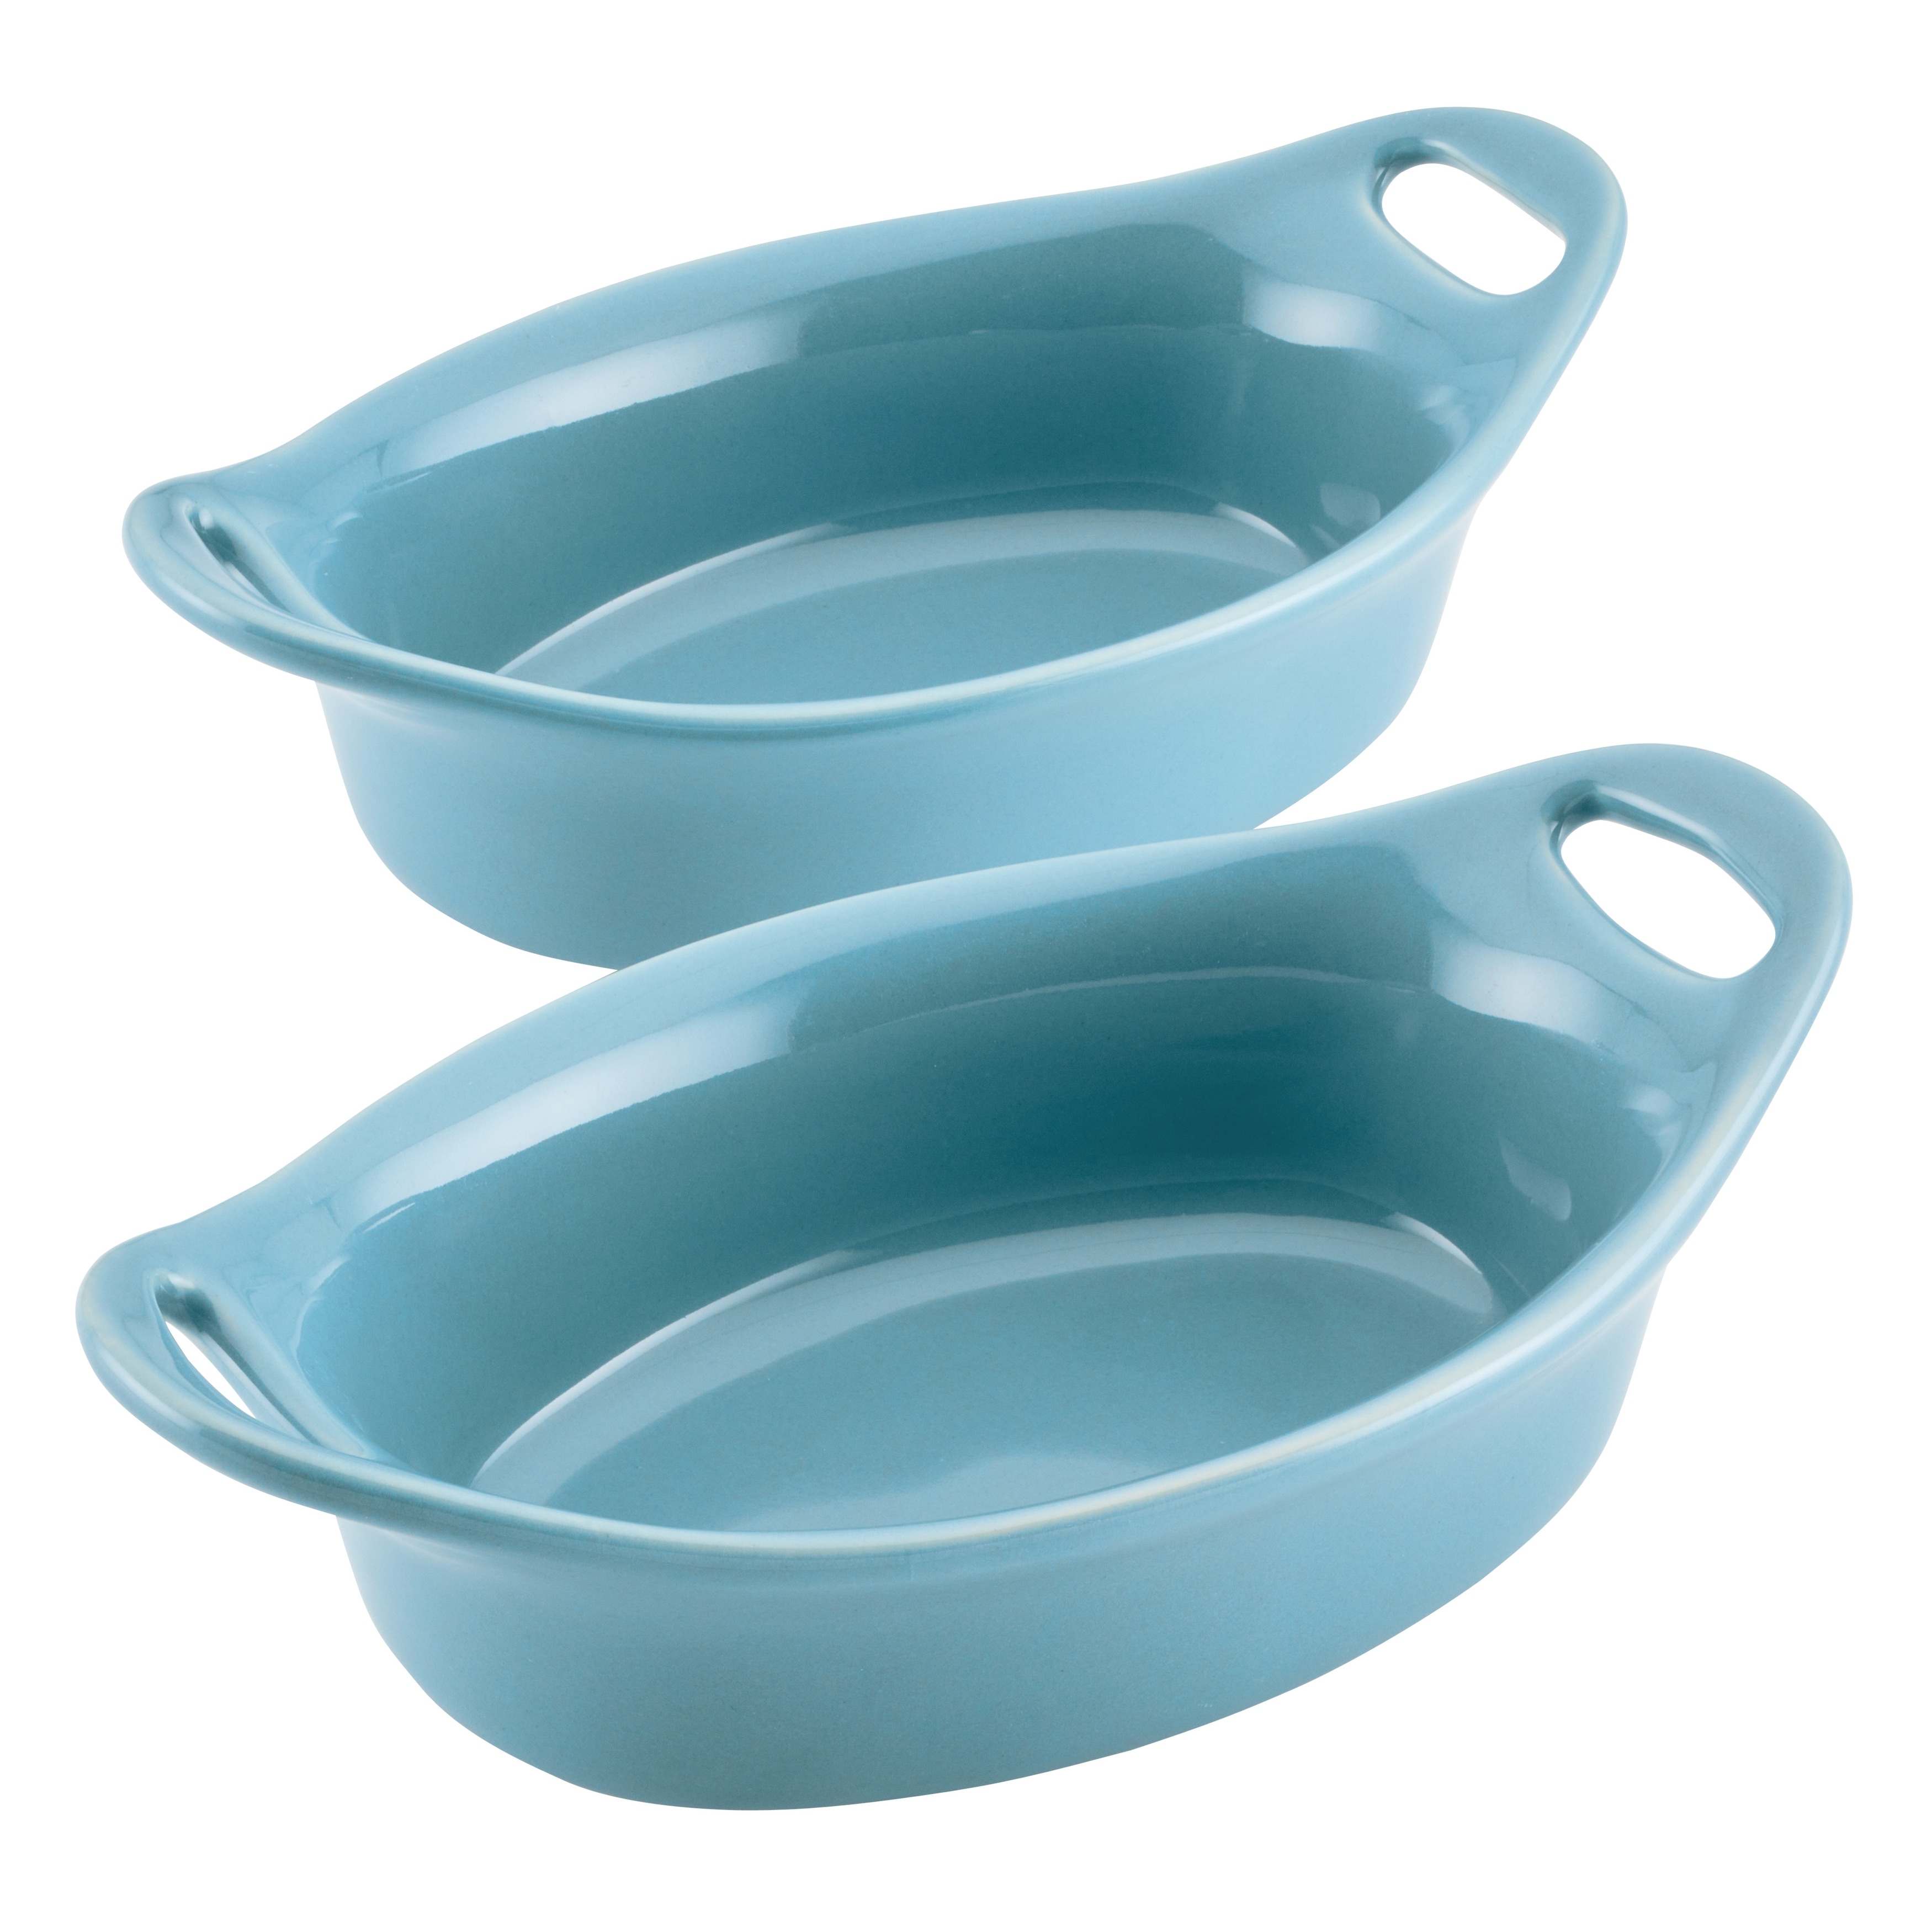 https://ak1.ostkcdn.com/images/products/is/images/direct/40935c96a246ff5f12a217880be95726df413121/Rachael-Ray-Ceramics-Oval-Au-Gratin-Set%2C-2-Piece%2C-Agave-Blue.jpg